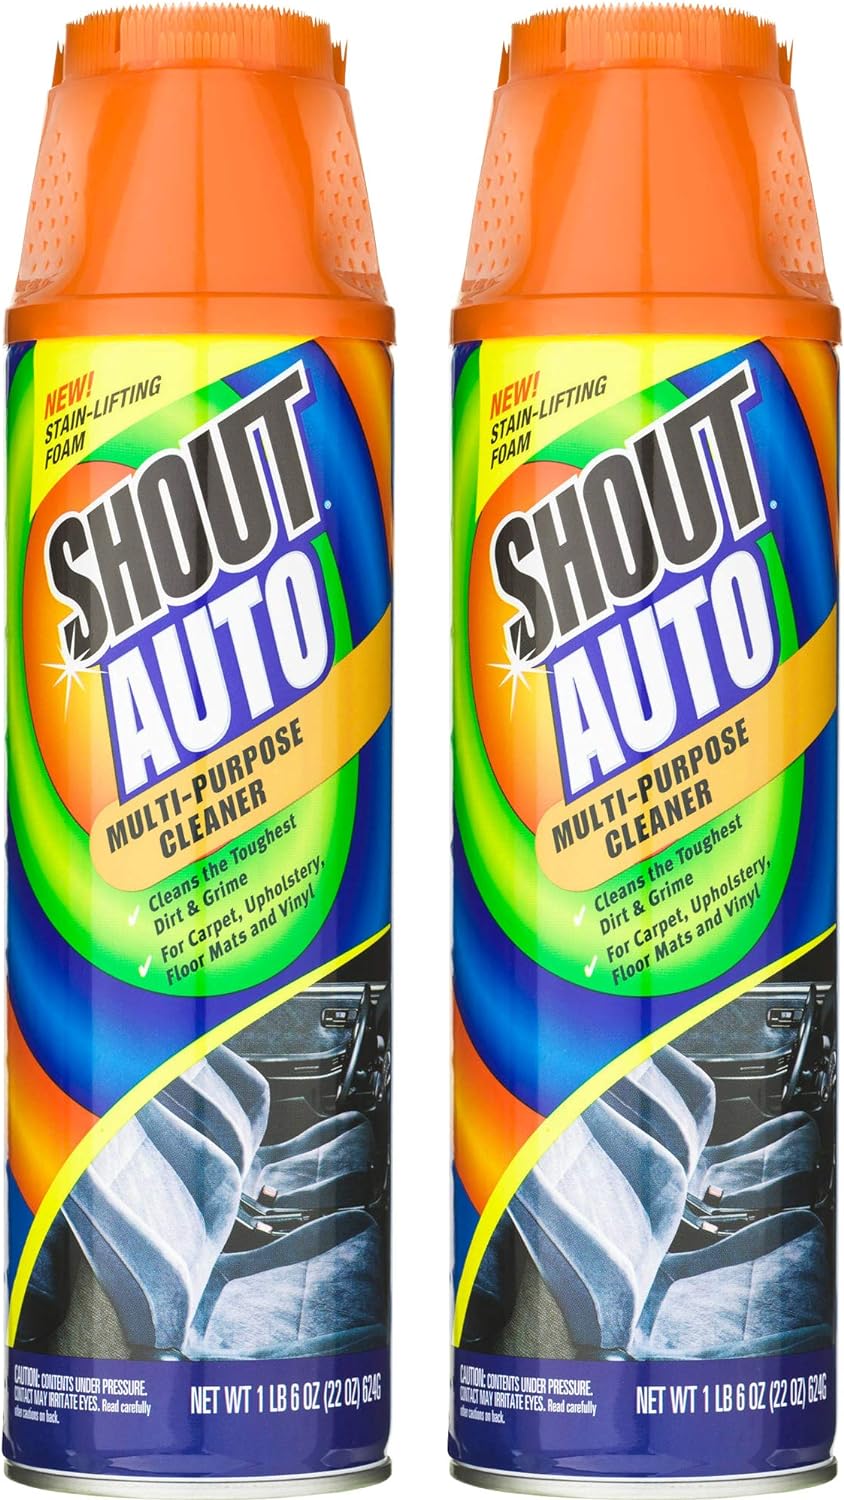 SHOUT Auto Multi-Purpose Cleaner and Stain Remover 22 oz Stain Lifting Foam (2) : Health & Household